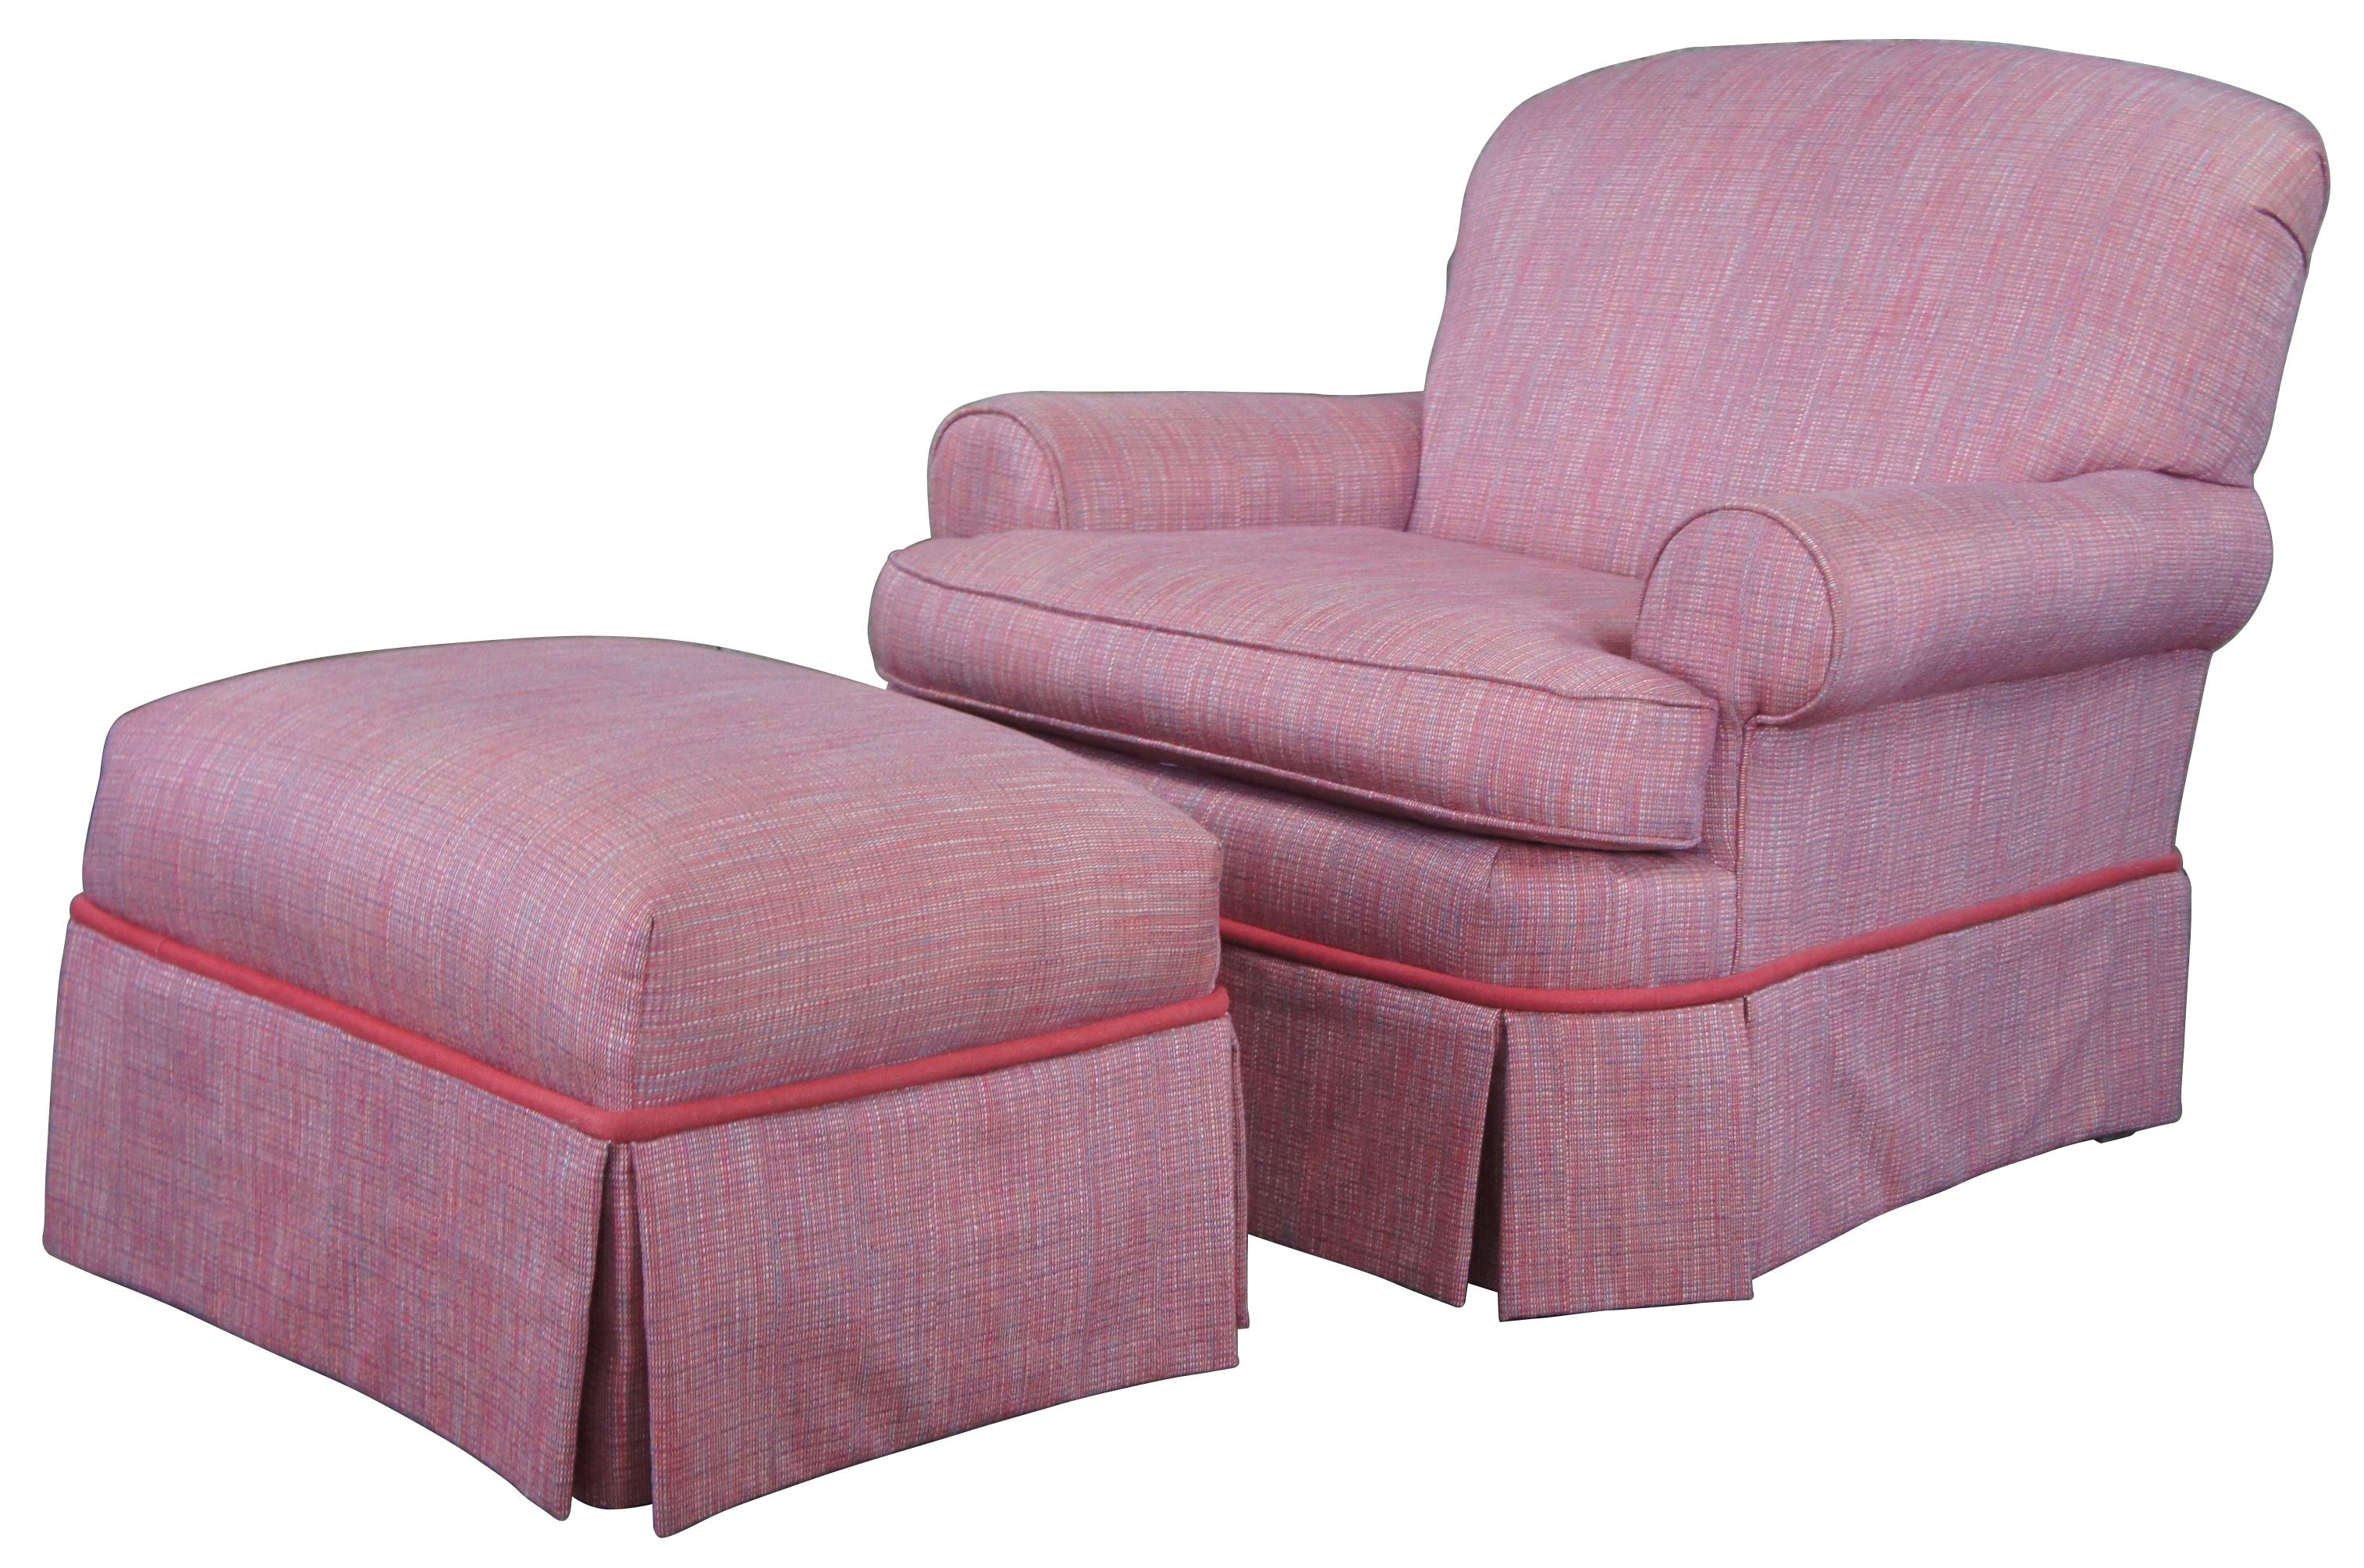 Vintage Edwards Furniture Inc club chair and ottoman featuring a pink upholstery with blue and white undertones, rolled arms and skirted legs.

Measures: 38